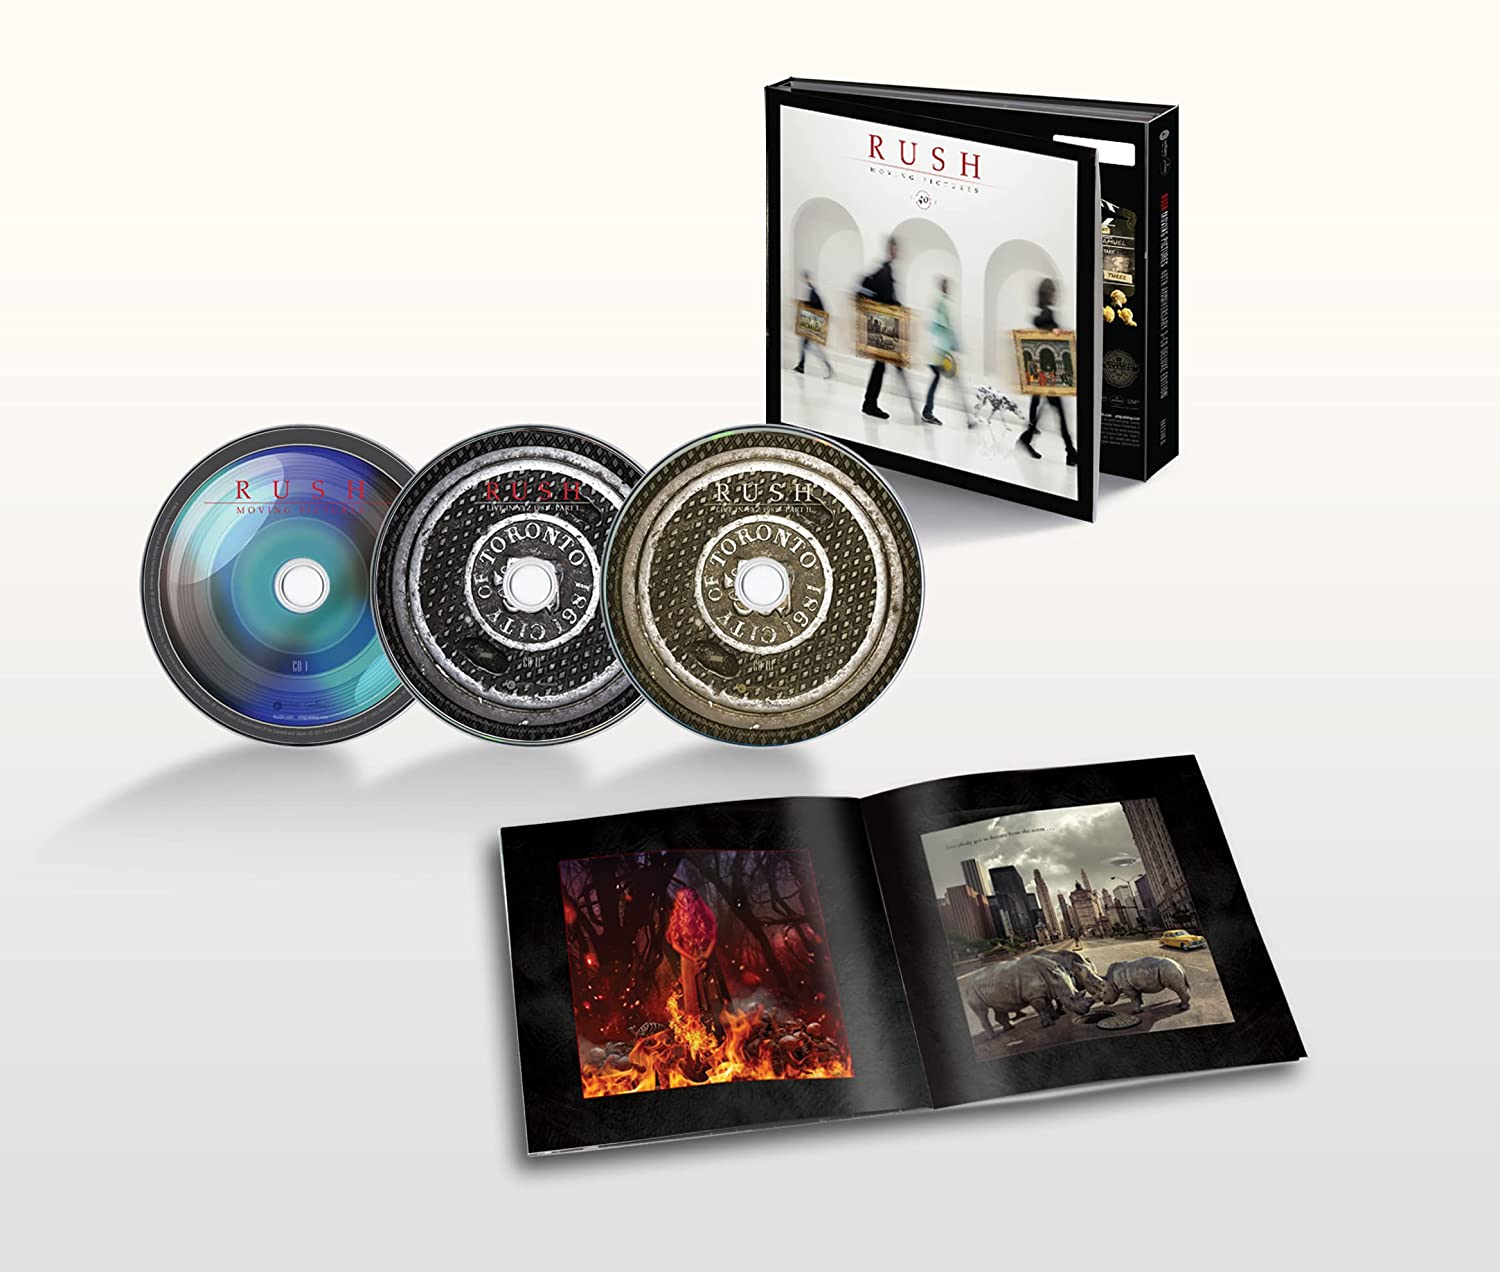 Moving Pictures (40th Anniversary 3CD) | Rush